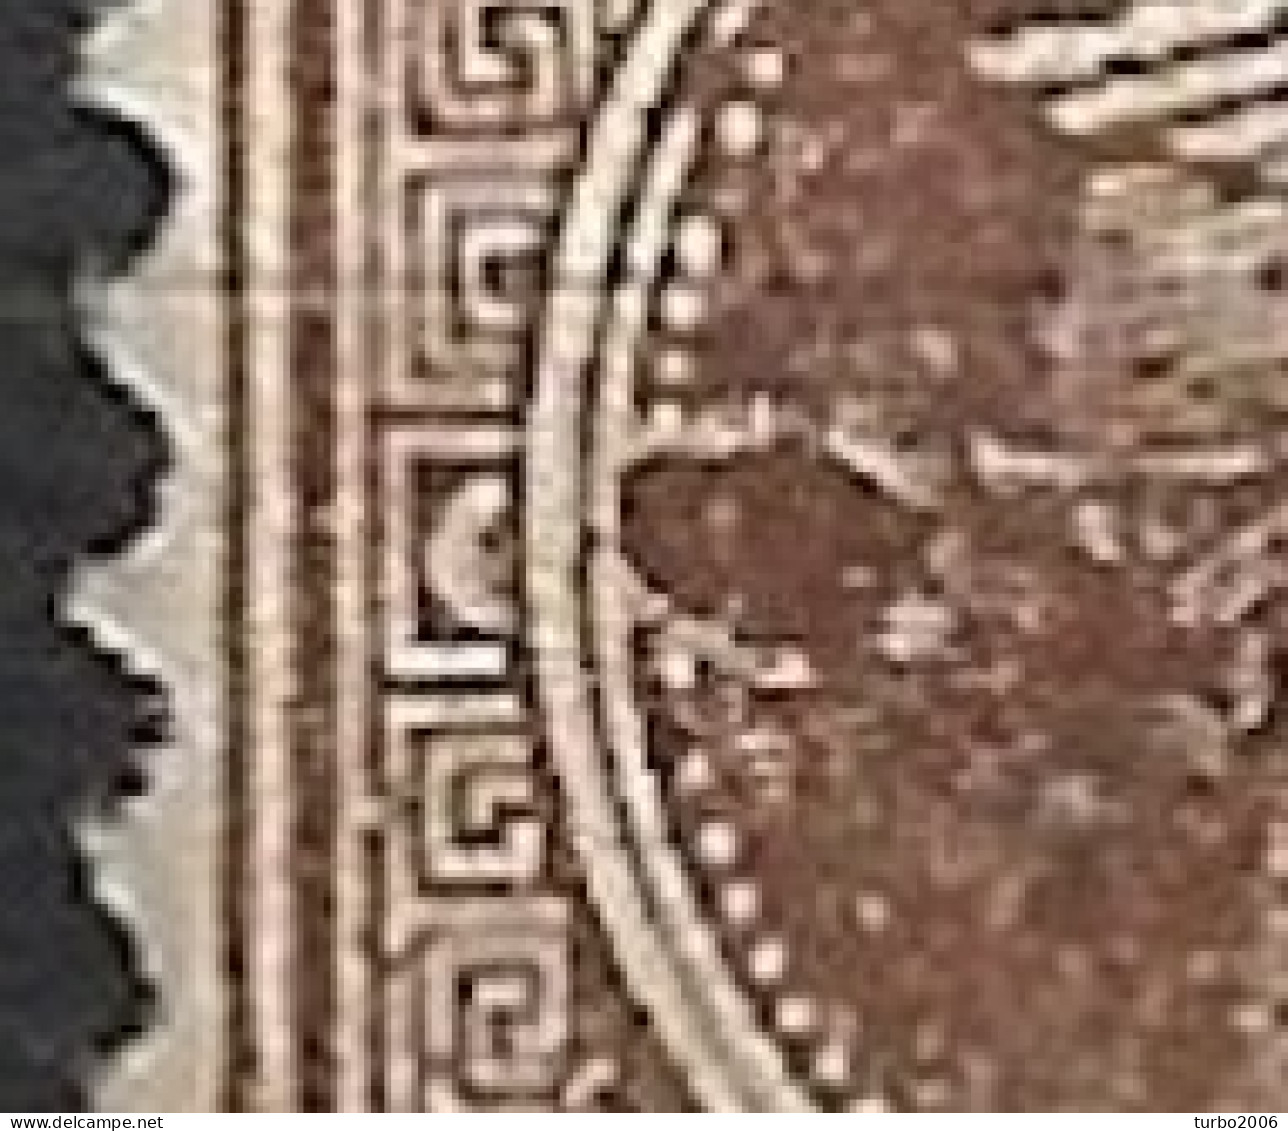 GREECE Large Colourspot In 1891-1896 Small Hermes Heads 1 L Brown Perforated Vl. 107 - Gebruikt